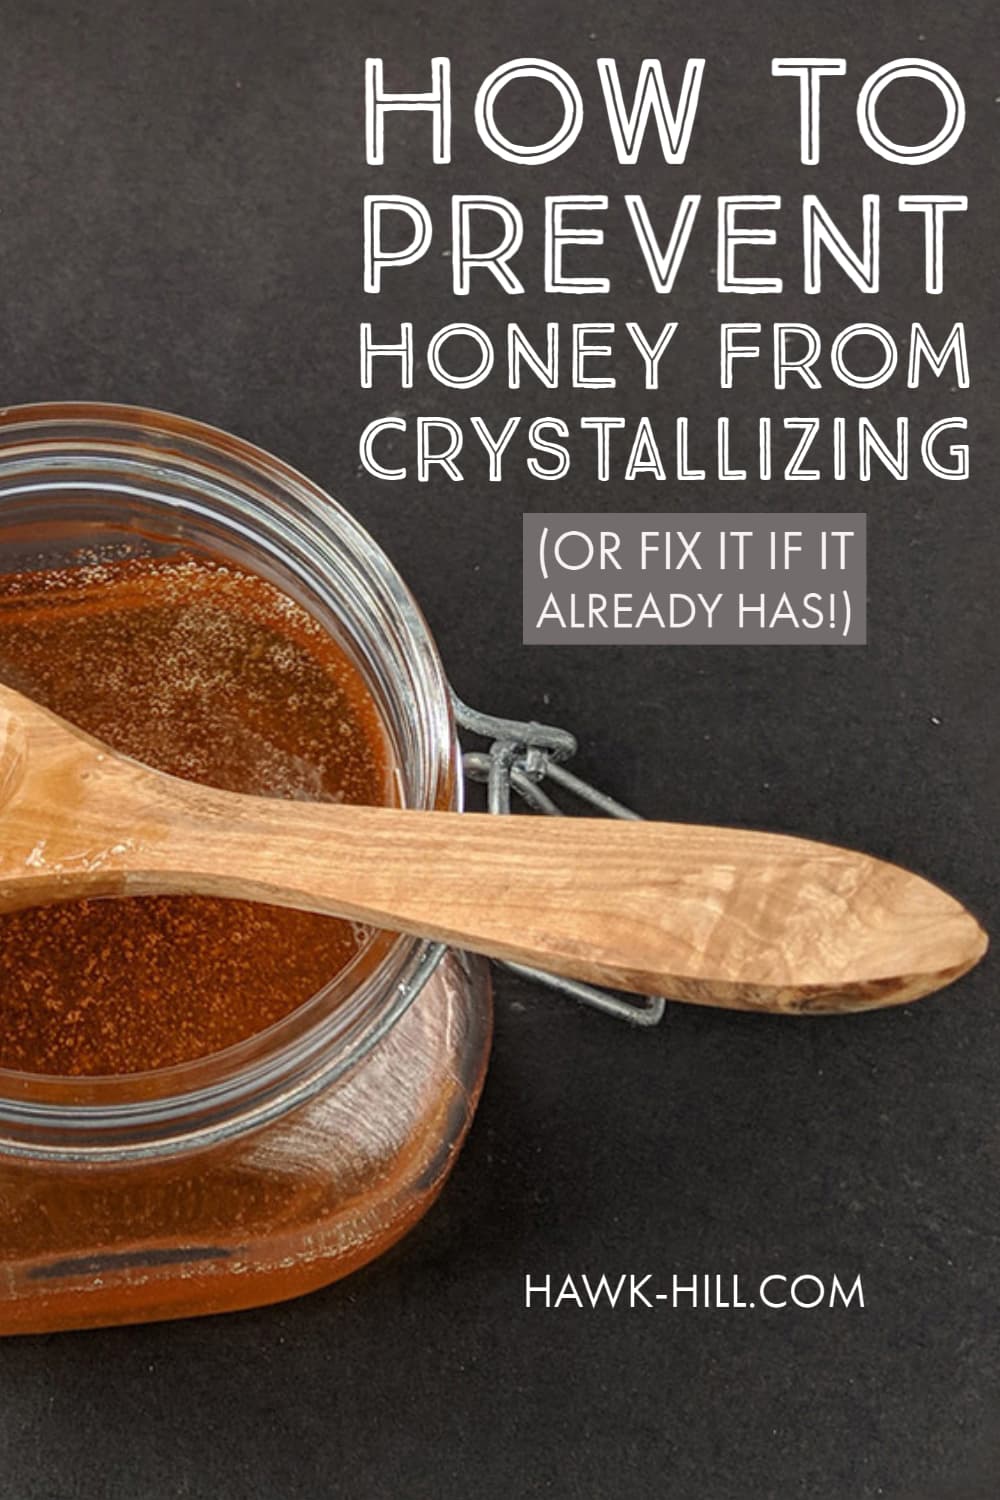 1 Easy Tip to prevent honey from crystallizing - & fix it if it already has